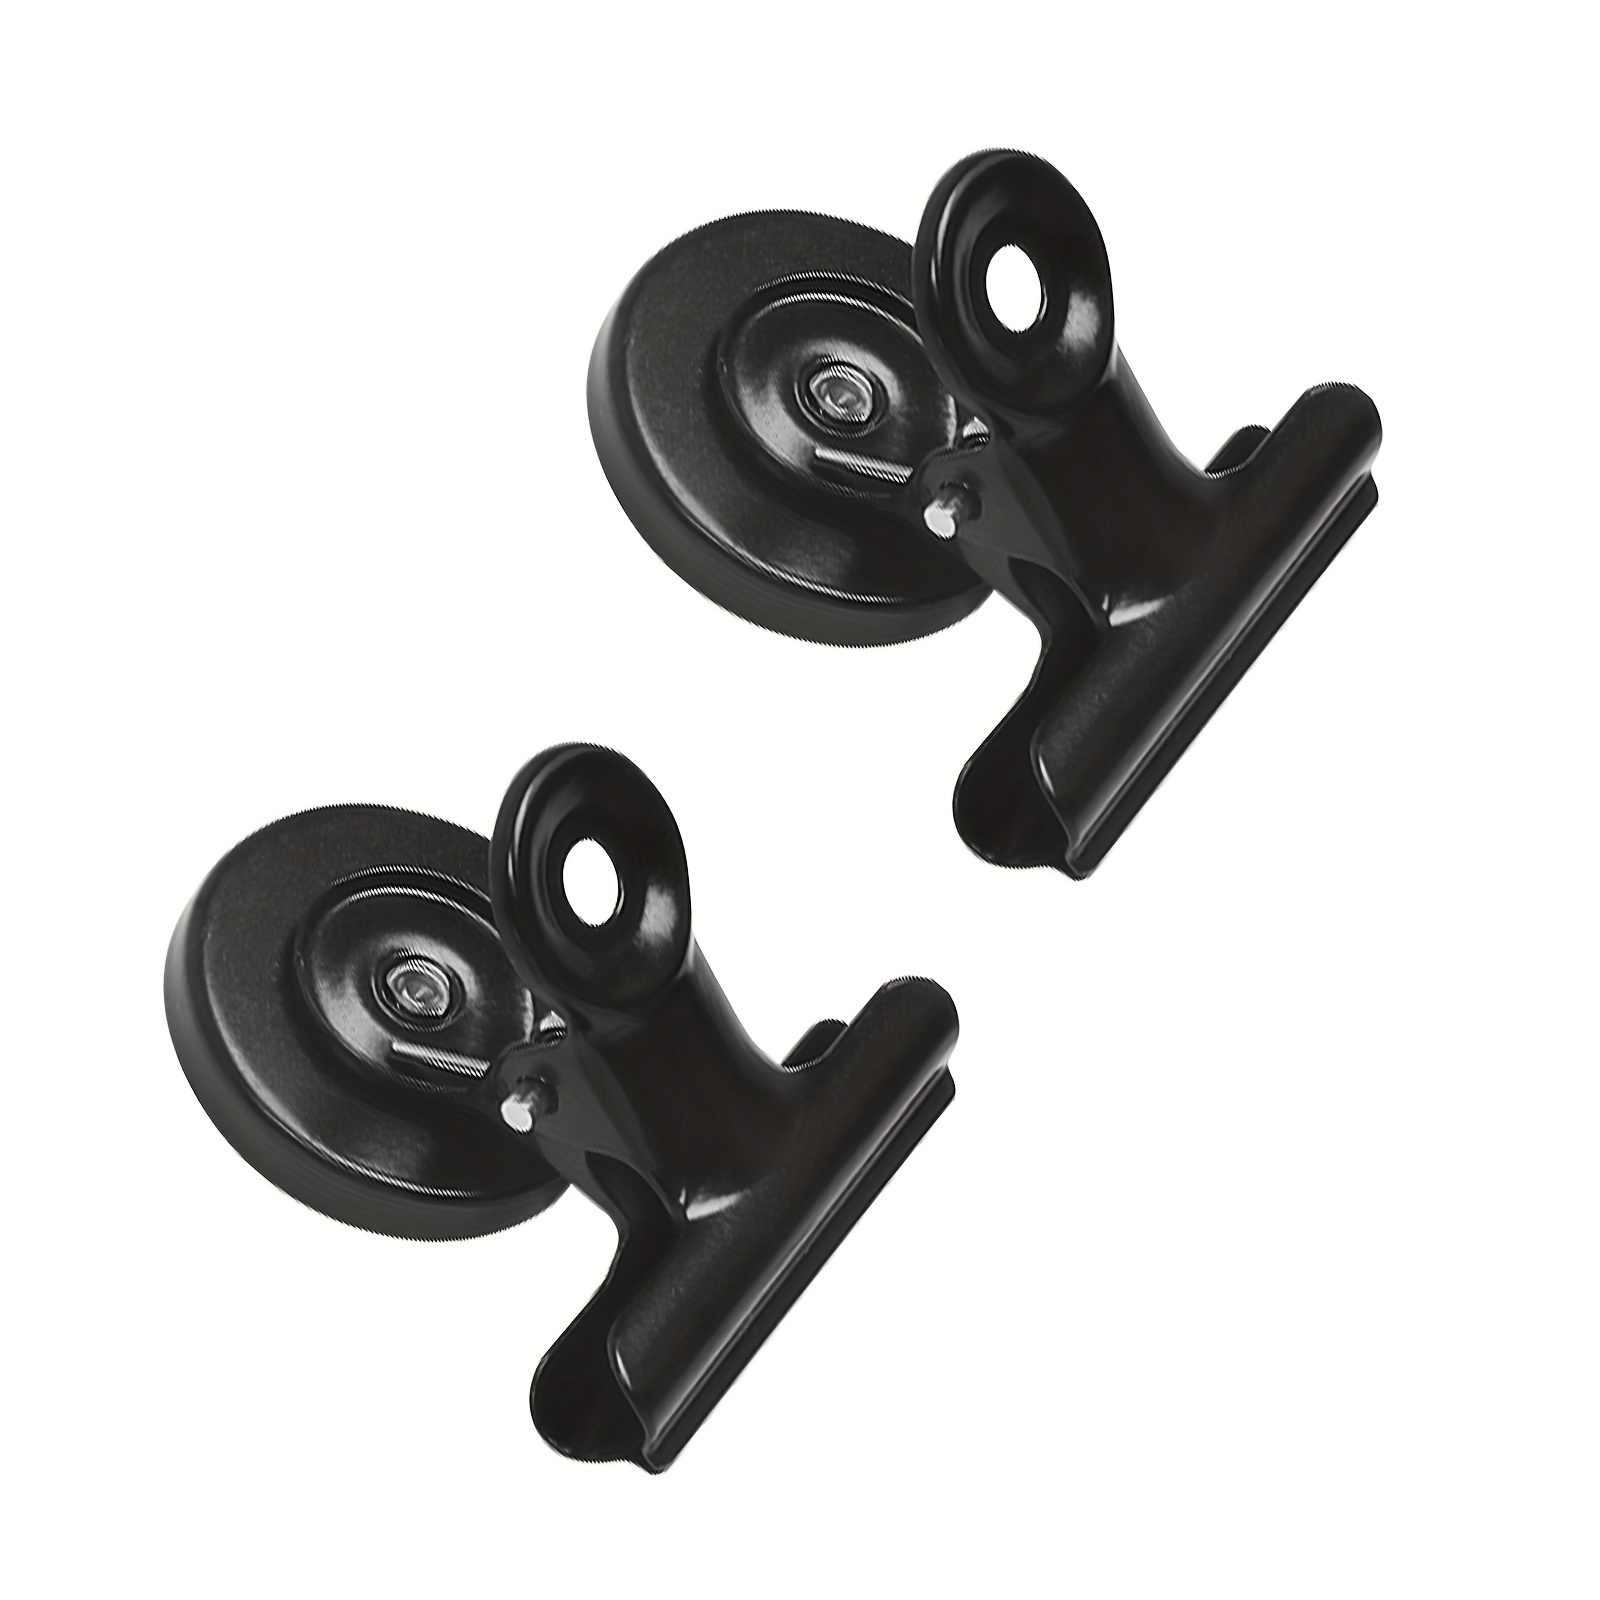 

2pcs Strong Black Magnetic Clip, Fridge Magnet, Suitable For Fridges, Whiteboards, Offices, Photo Displays, Fixing Paper